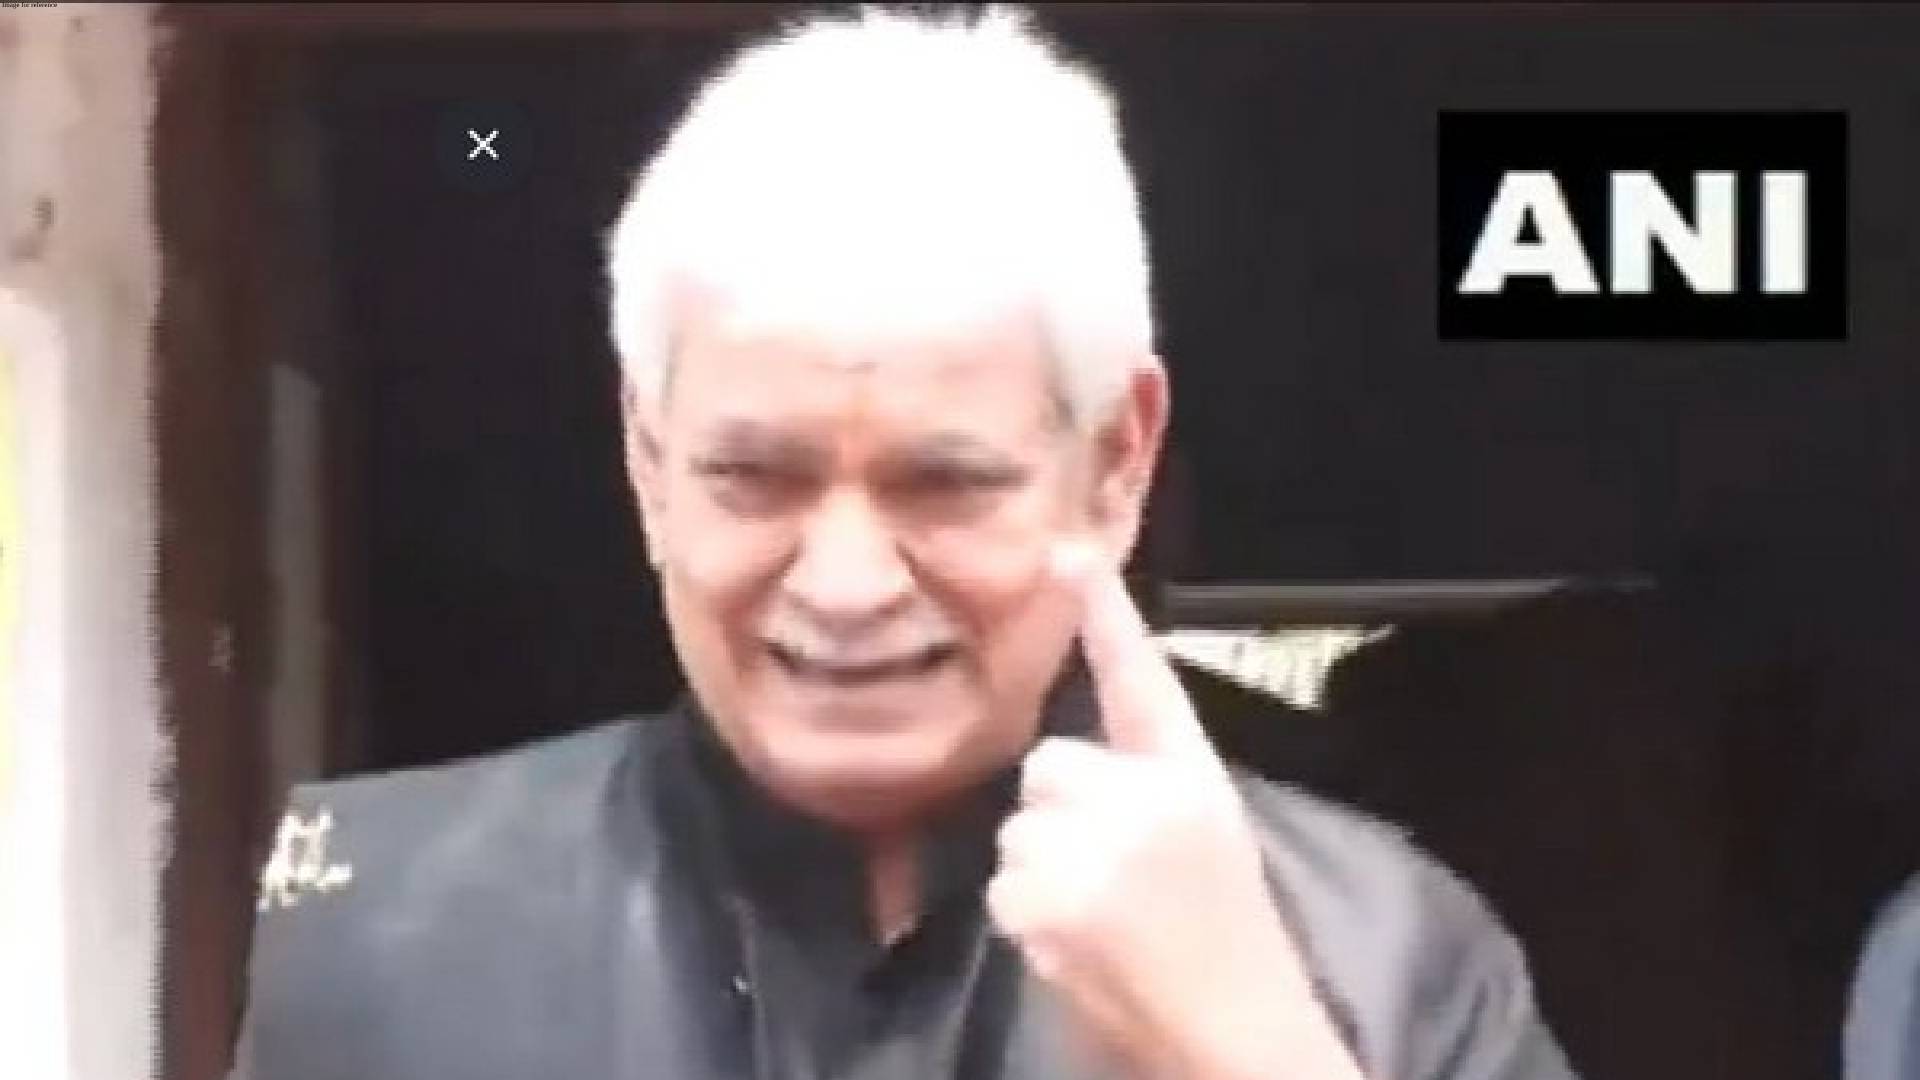 J-K Governor Manoj Sinha cast his vote in UP's Ghazipur, urges voters to participate